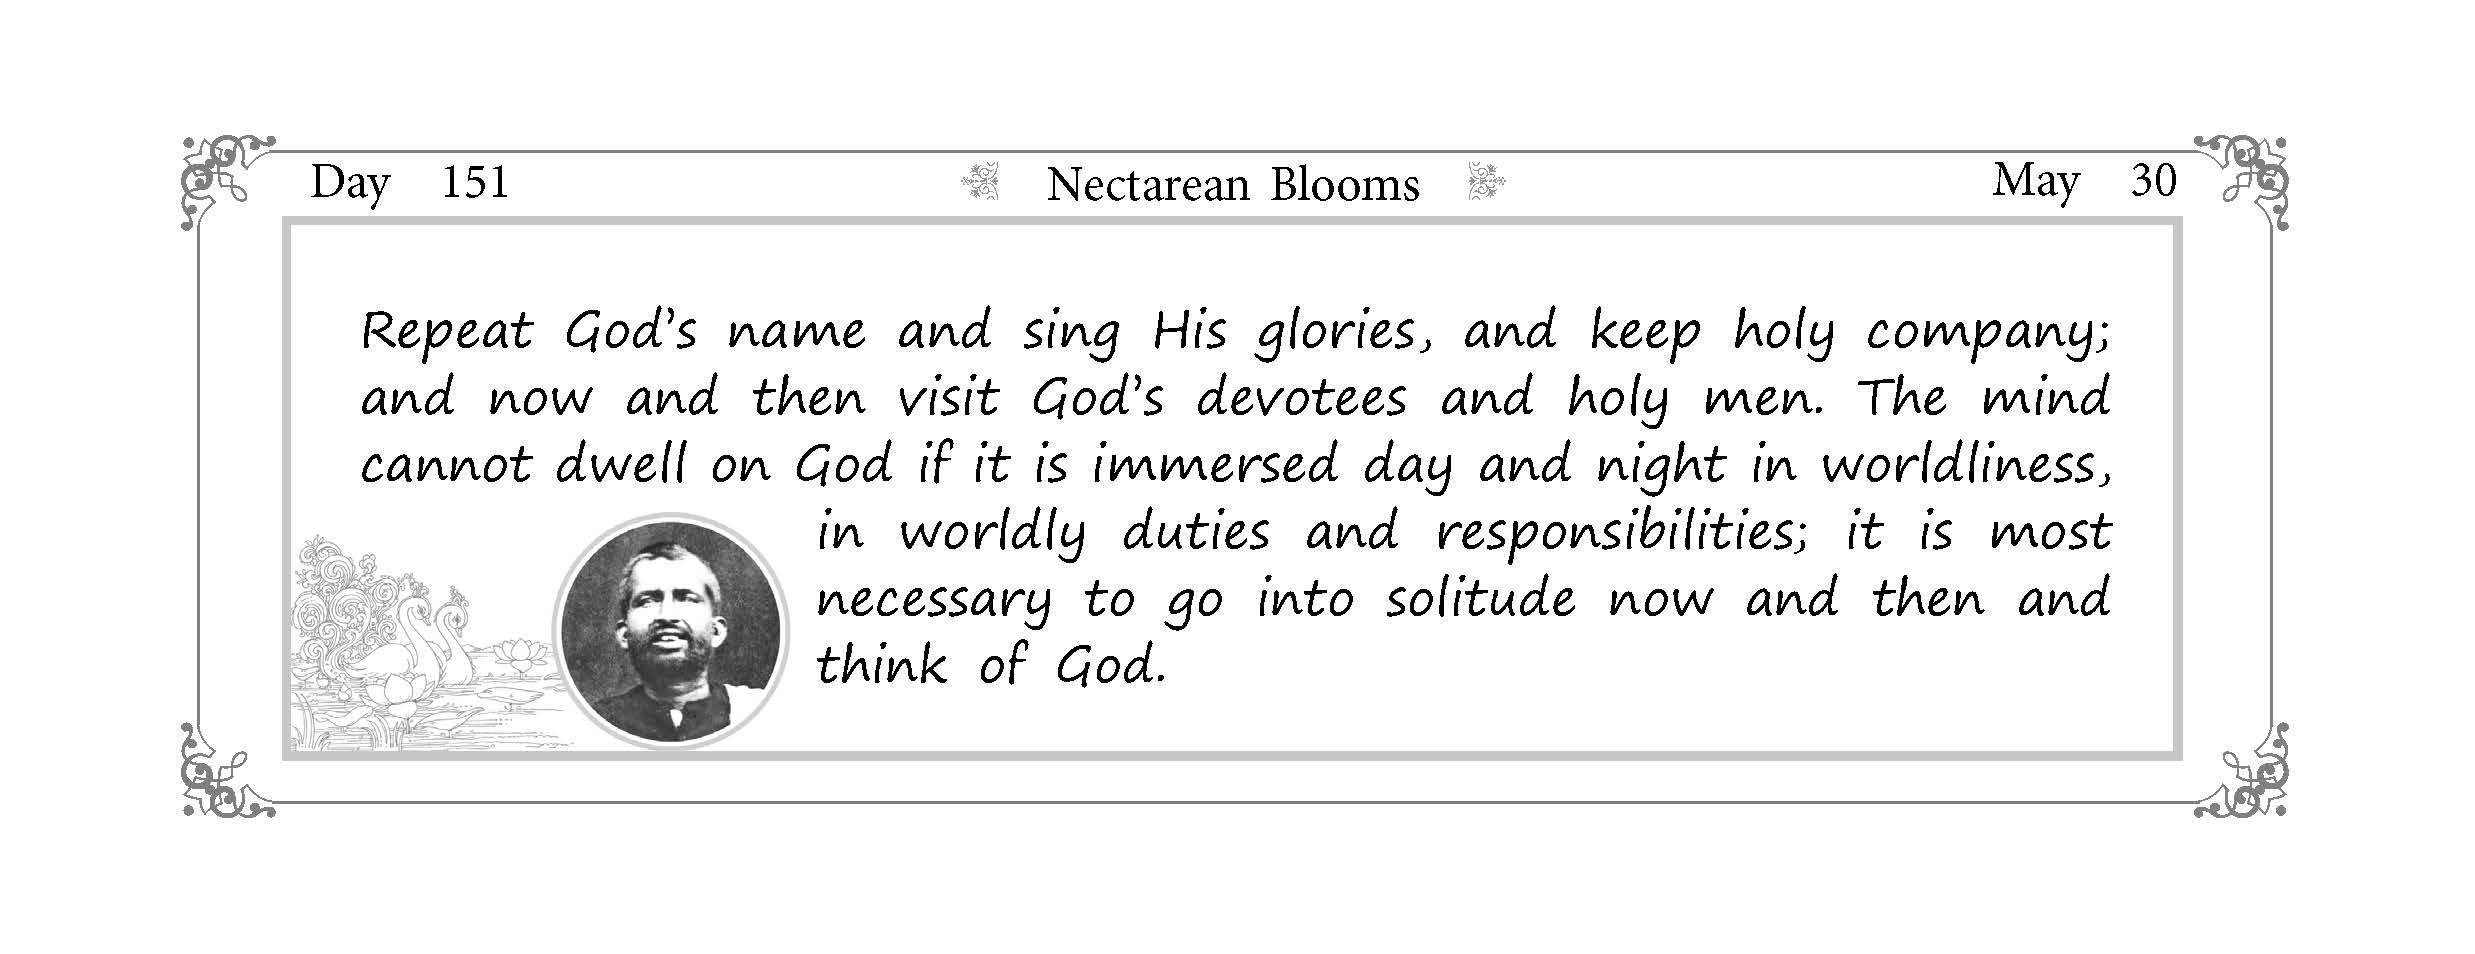 Nectarean Blooms - Daily Quote From Sri Ramakrishna